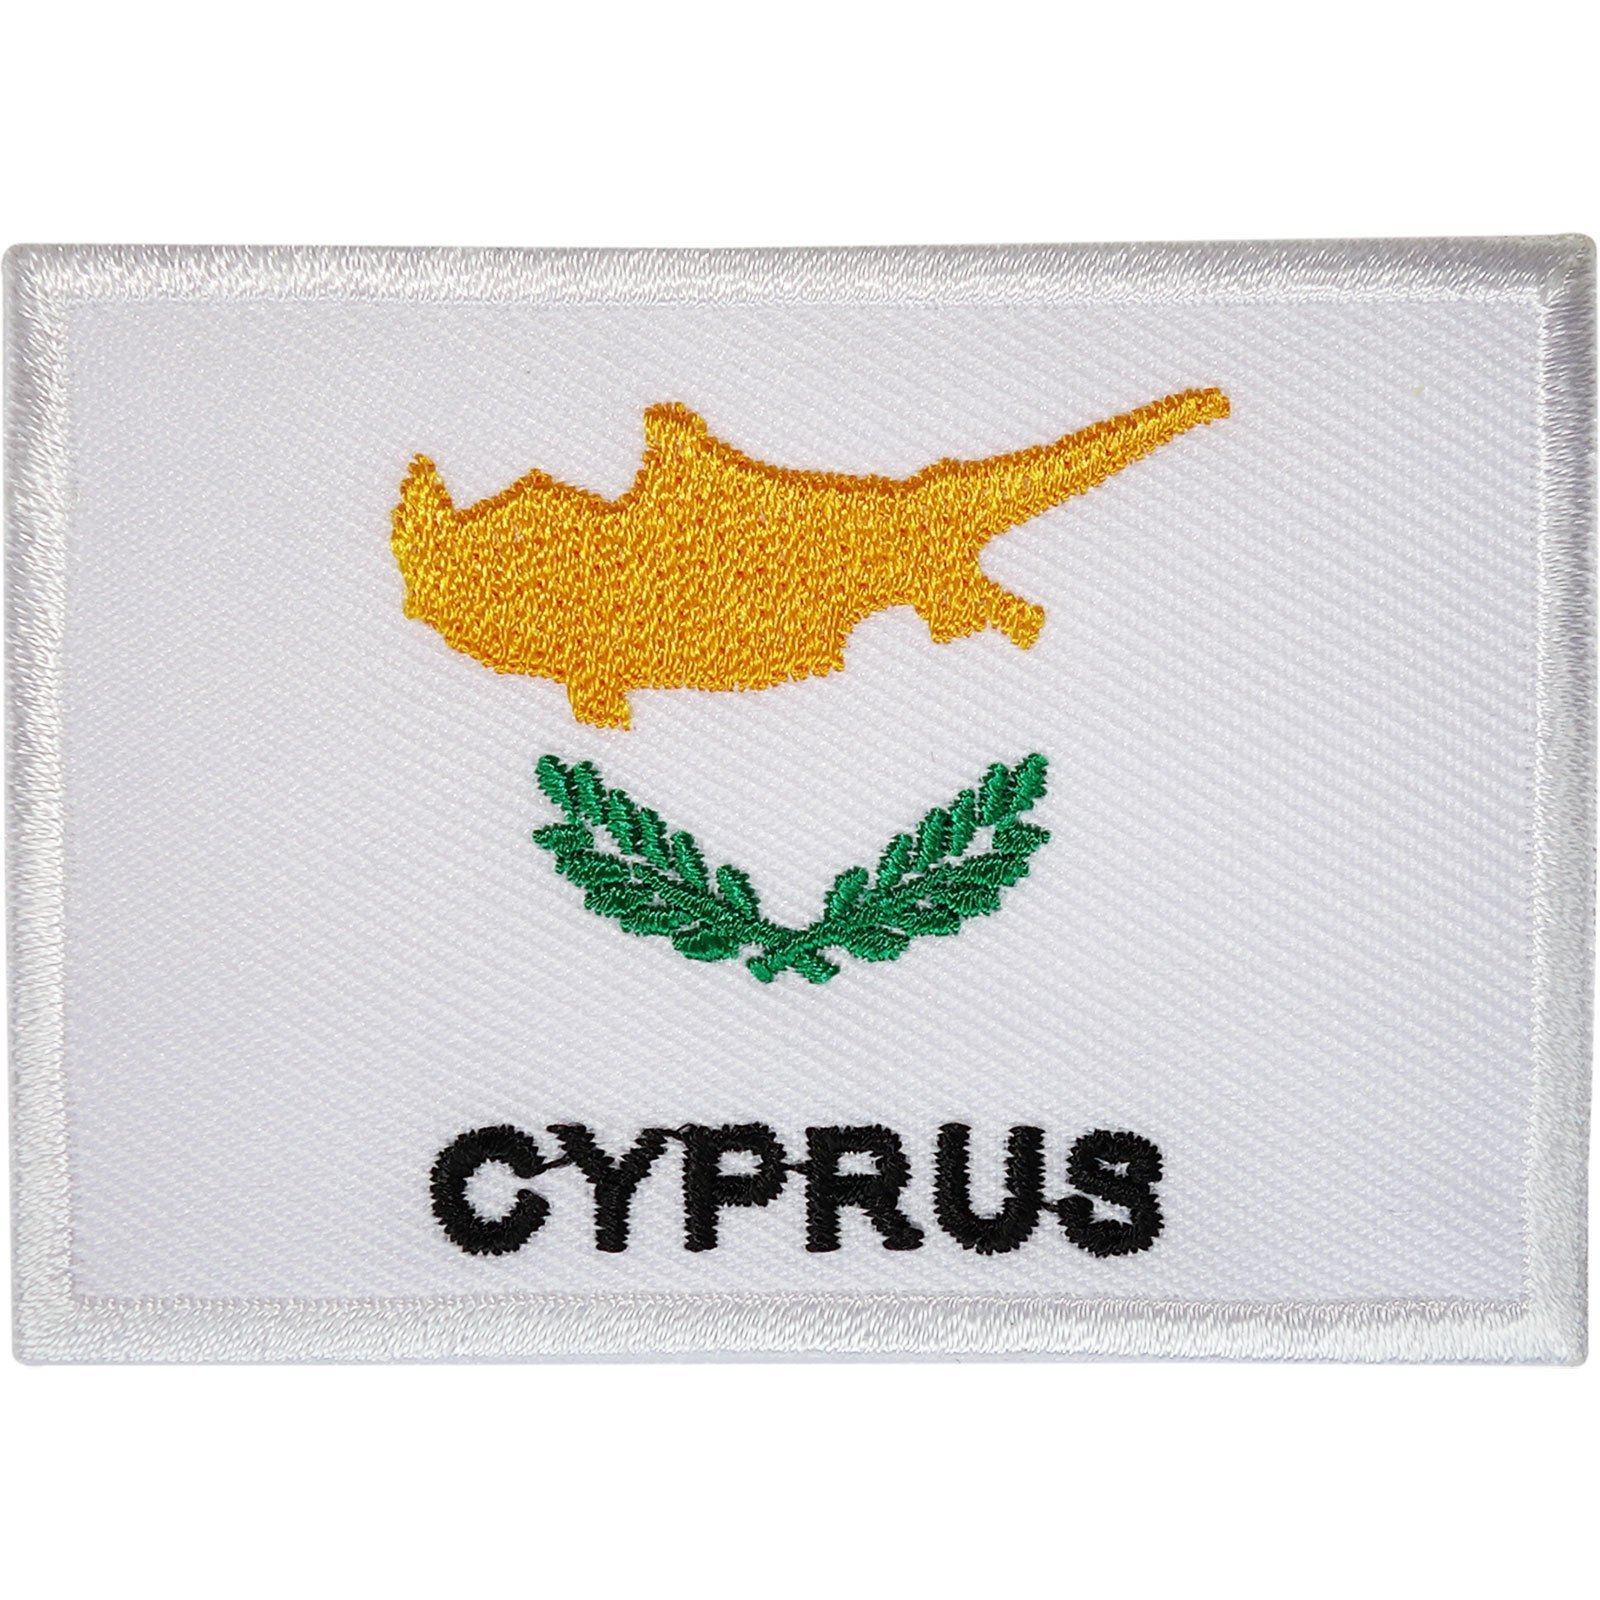 Cyprus Flag Patch Cypriot Embroidered Badge Iron Sew On Clothes Jacket Shirt Bag